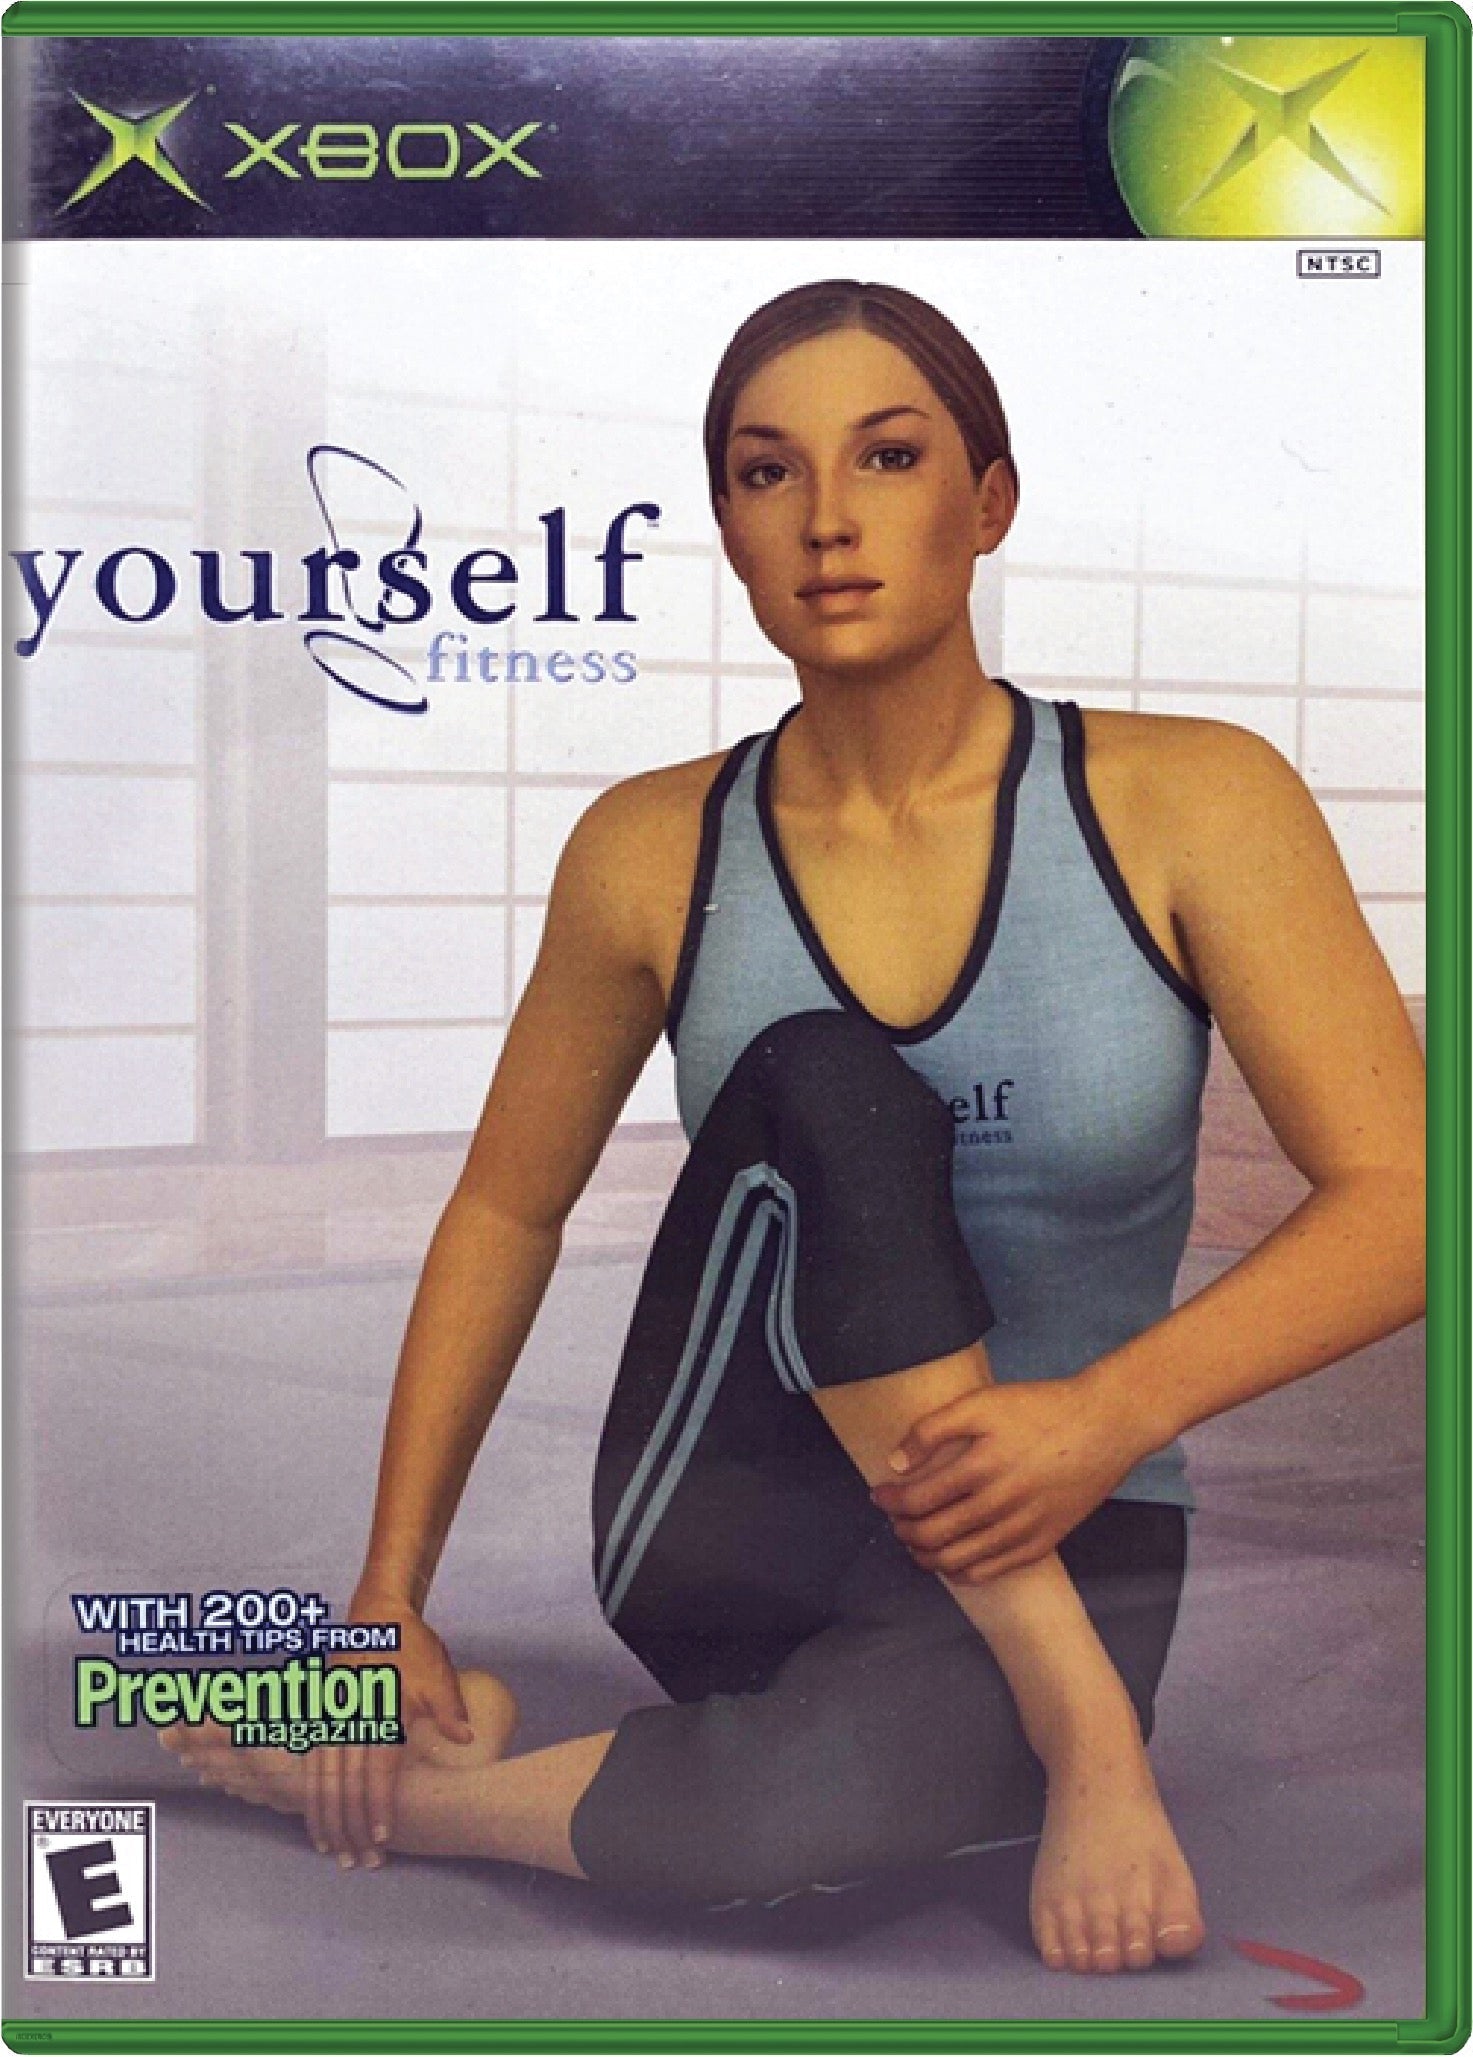 Yourself Fitness Cover Art